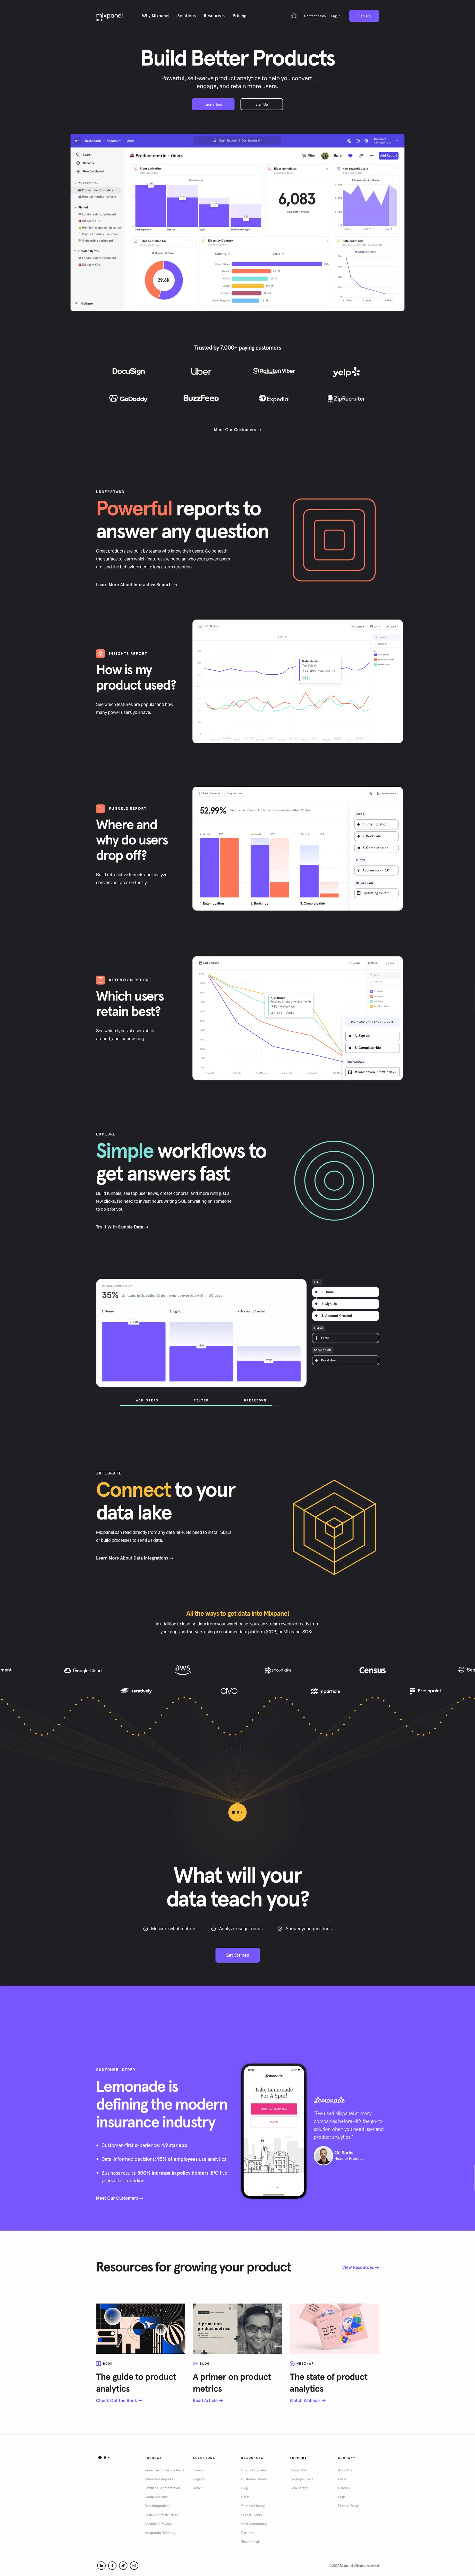 Mixpanel Landing Page Example: Build Better Products. Powerful, self-serve product analytics to help you convert, engage, and retain more users.